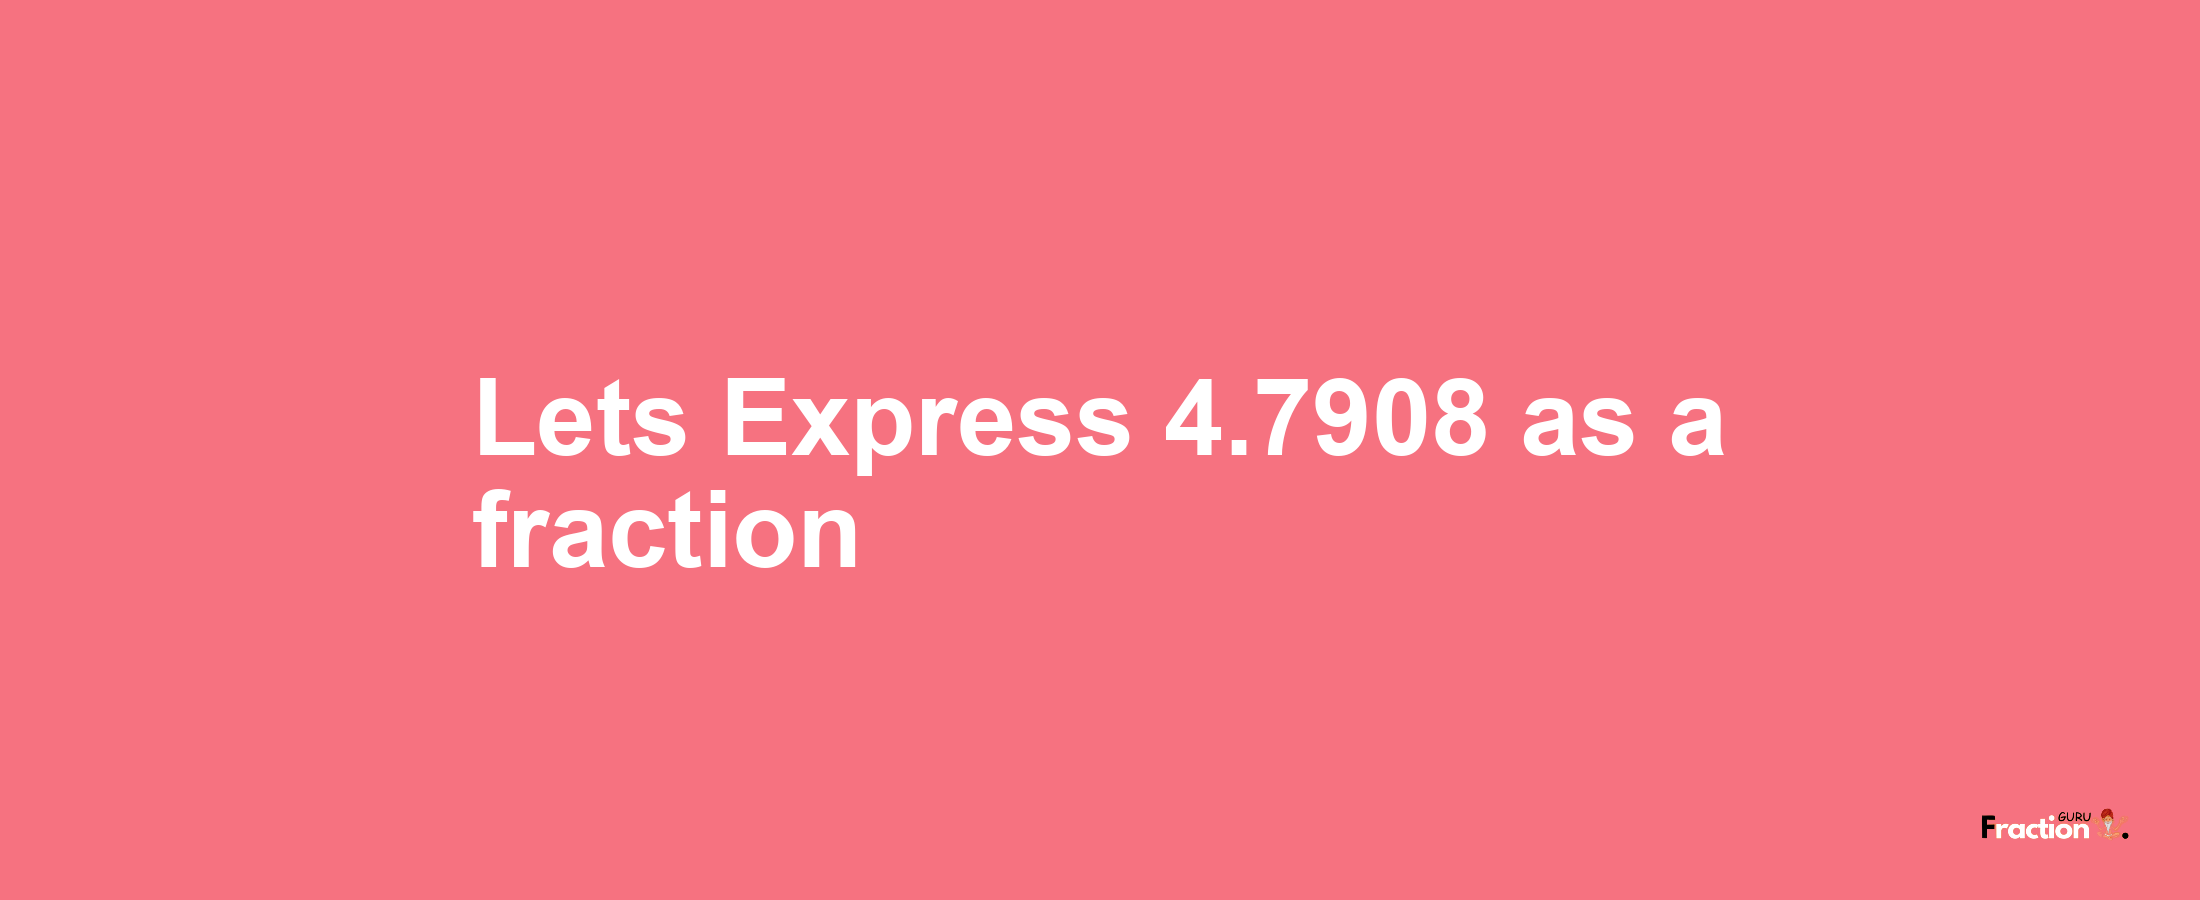 Lets Express 4.7908 as afraction